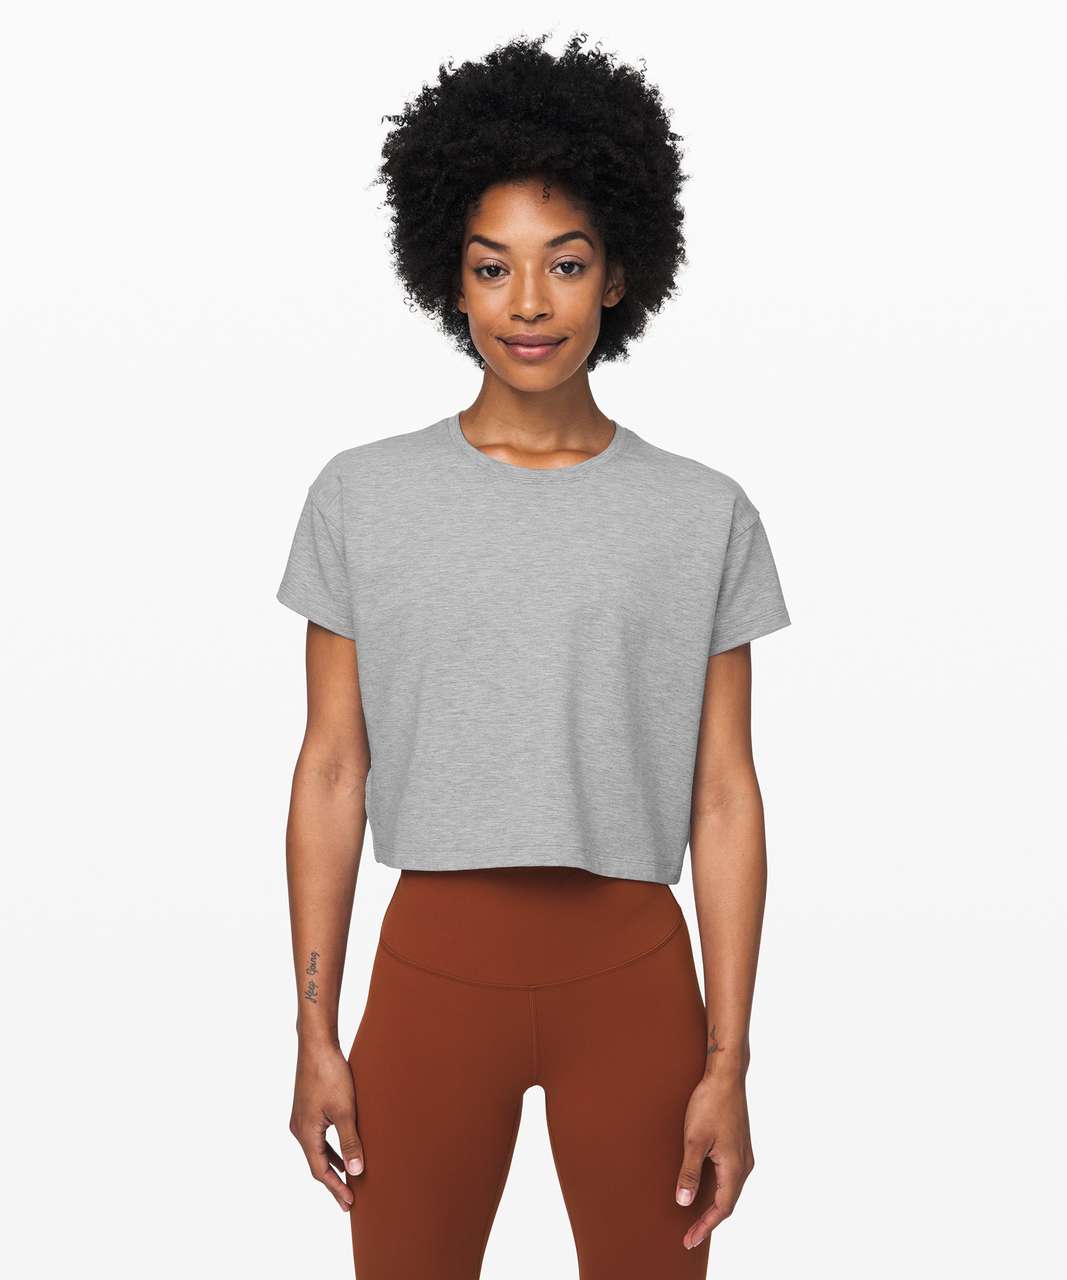 Lululemon Cates Tee - Heathered Core Light Grey (First Release)